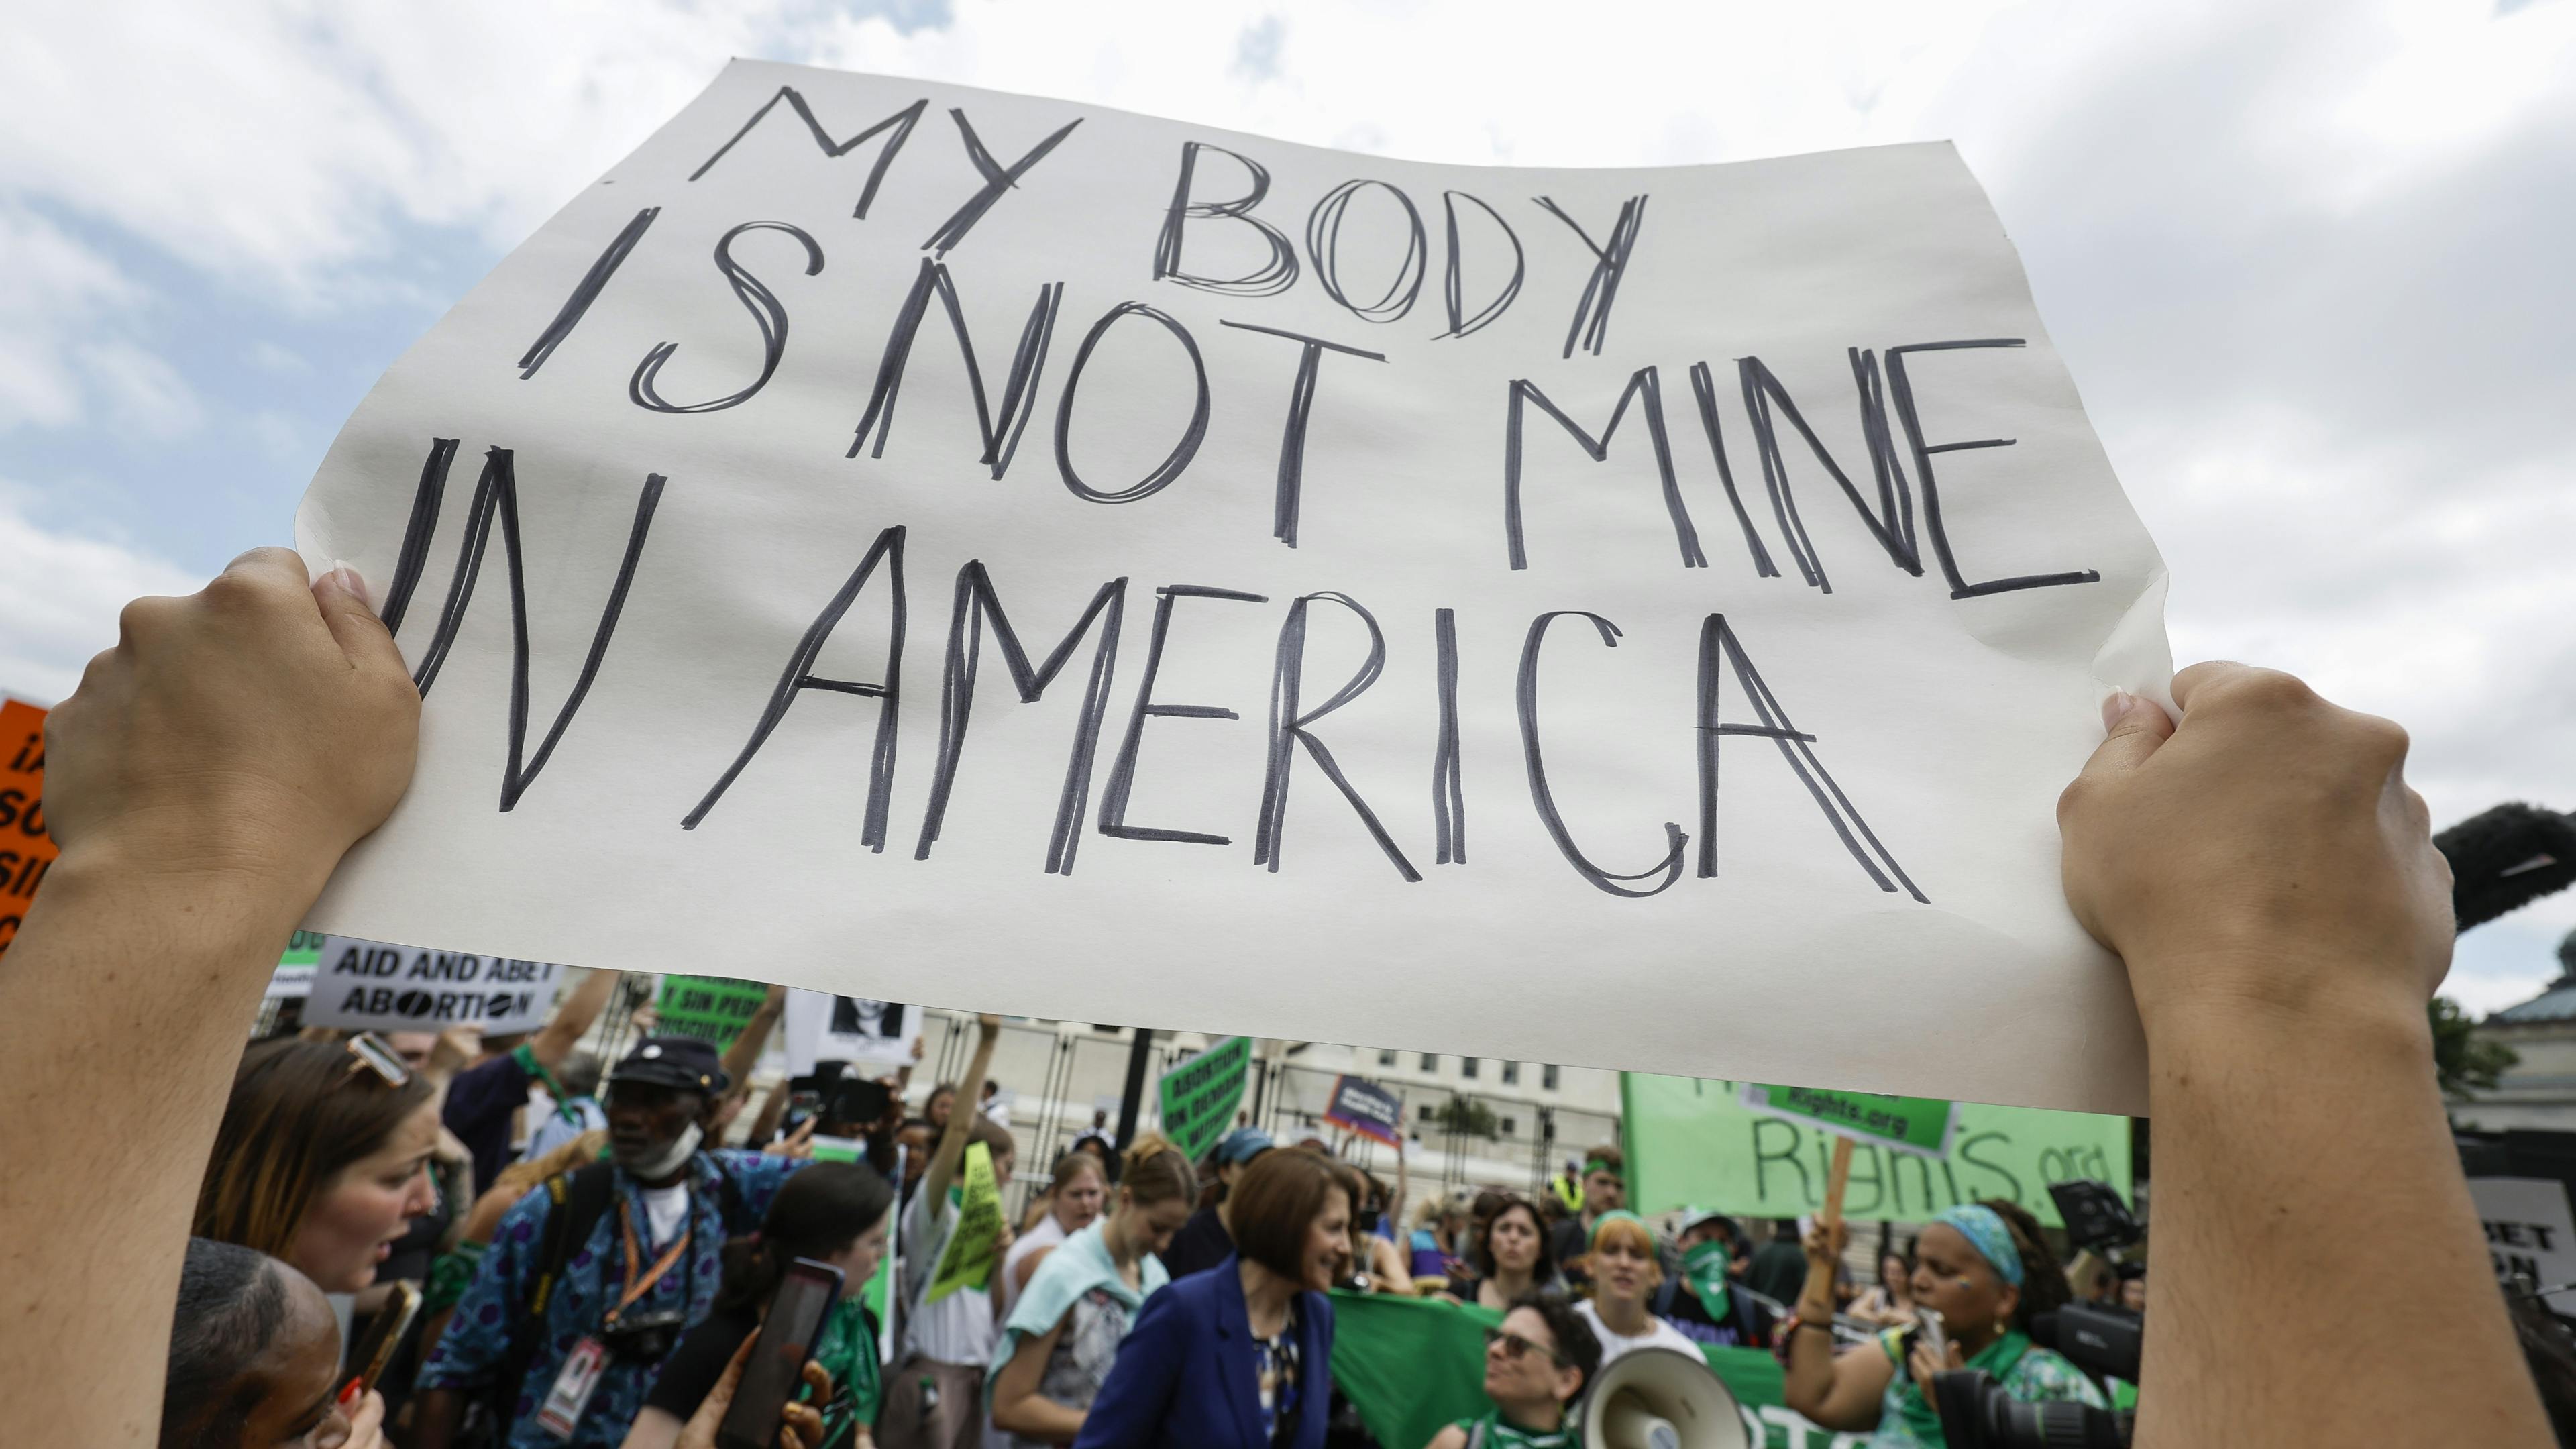 Poster that reads "My body is not mine in America"